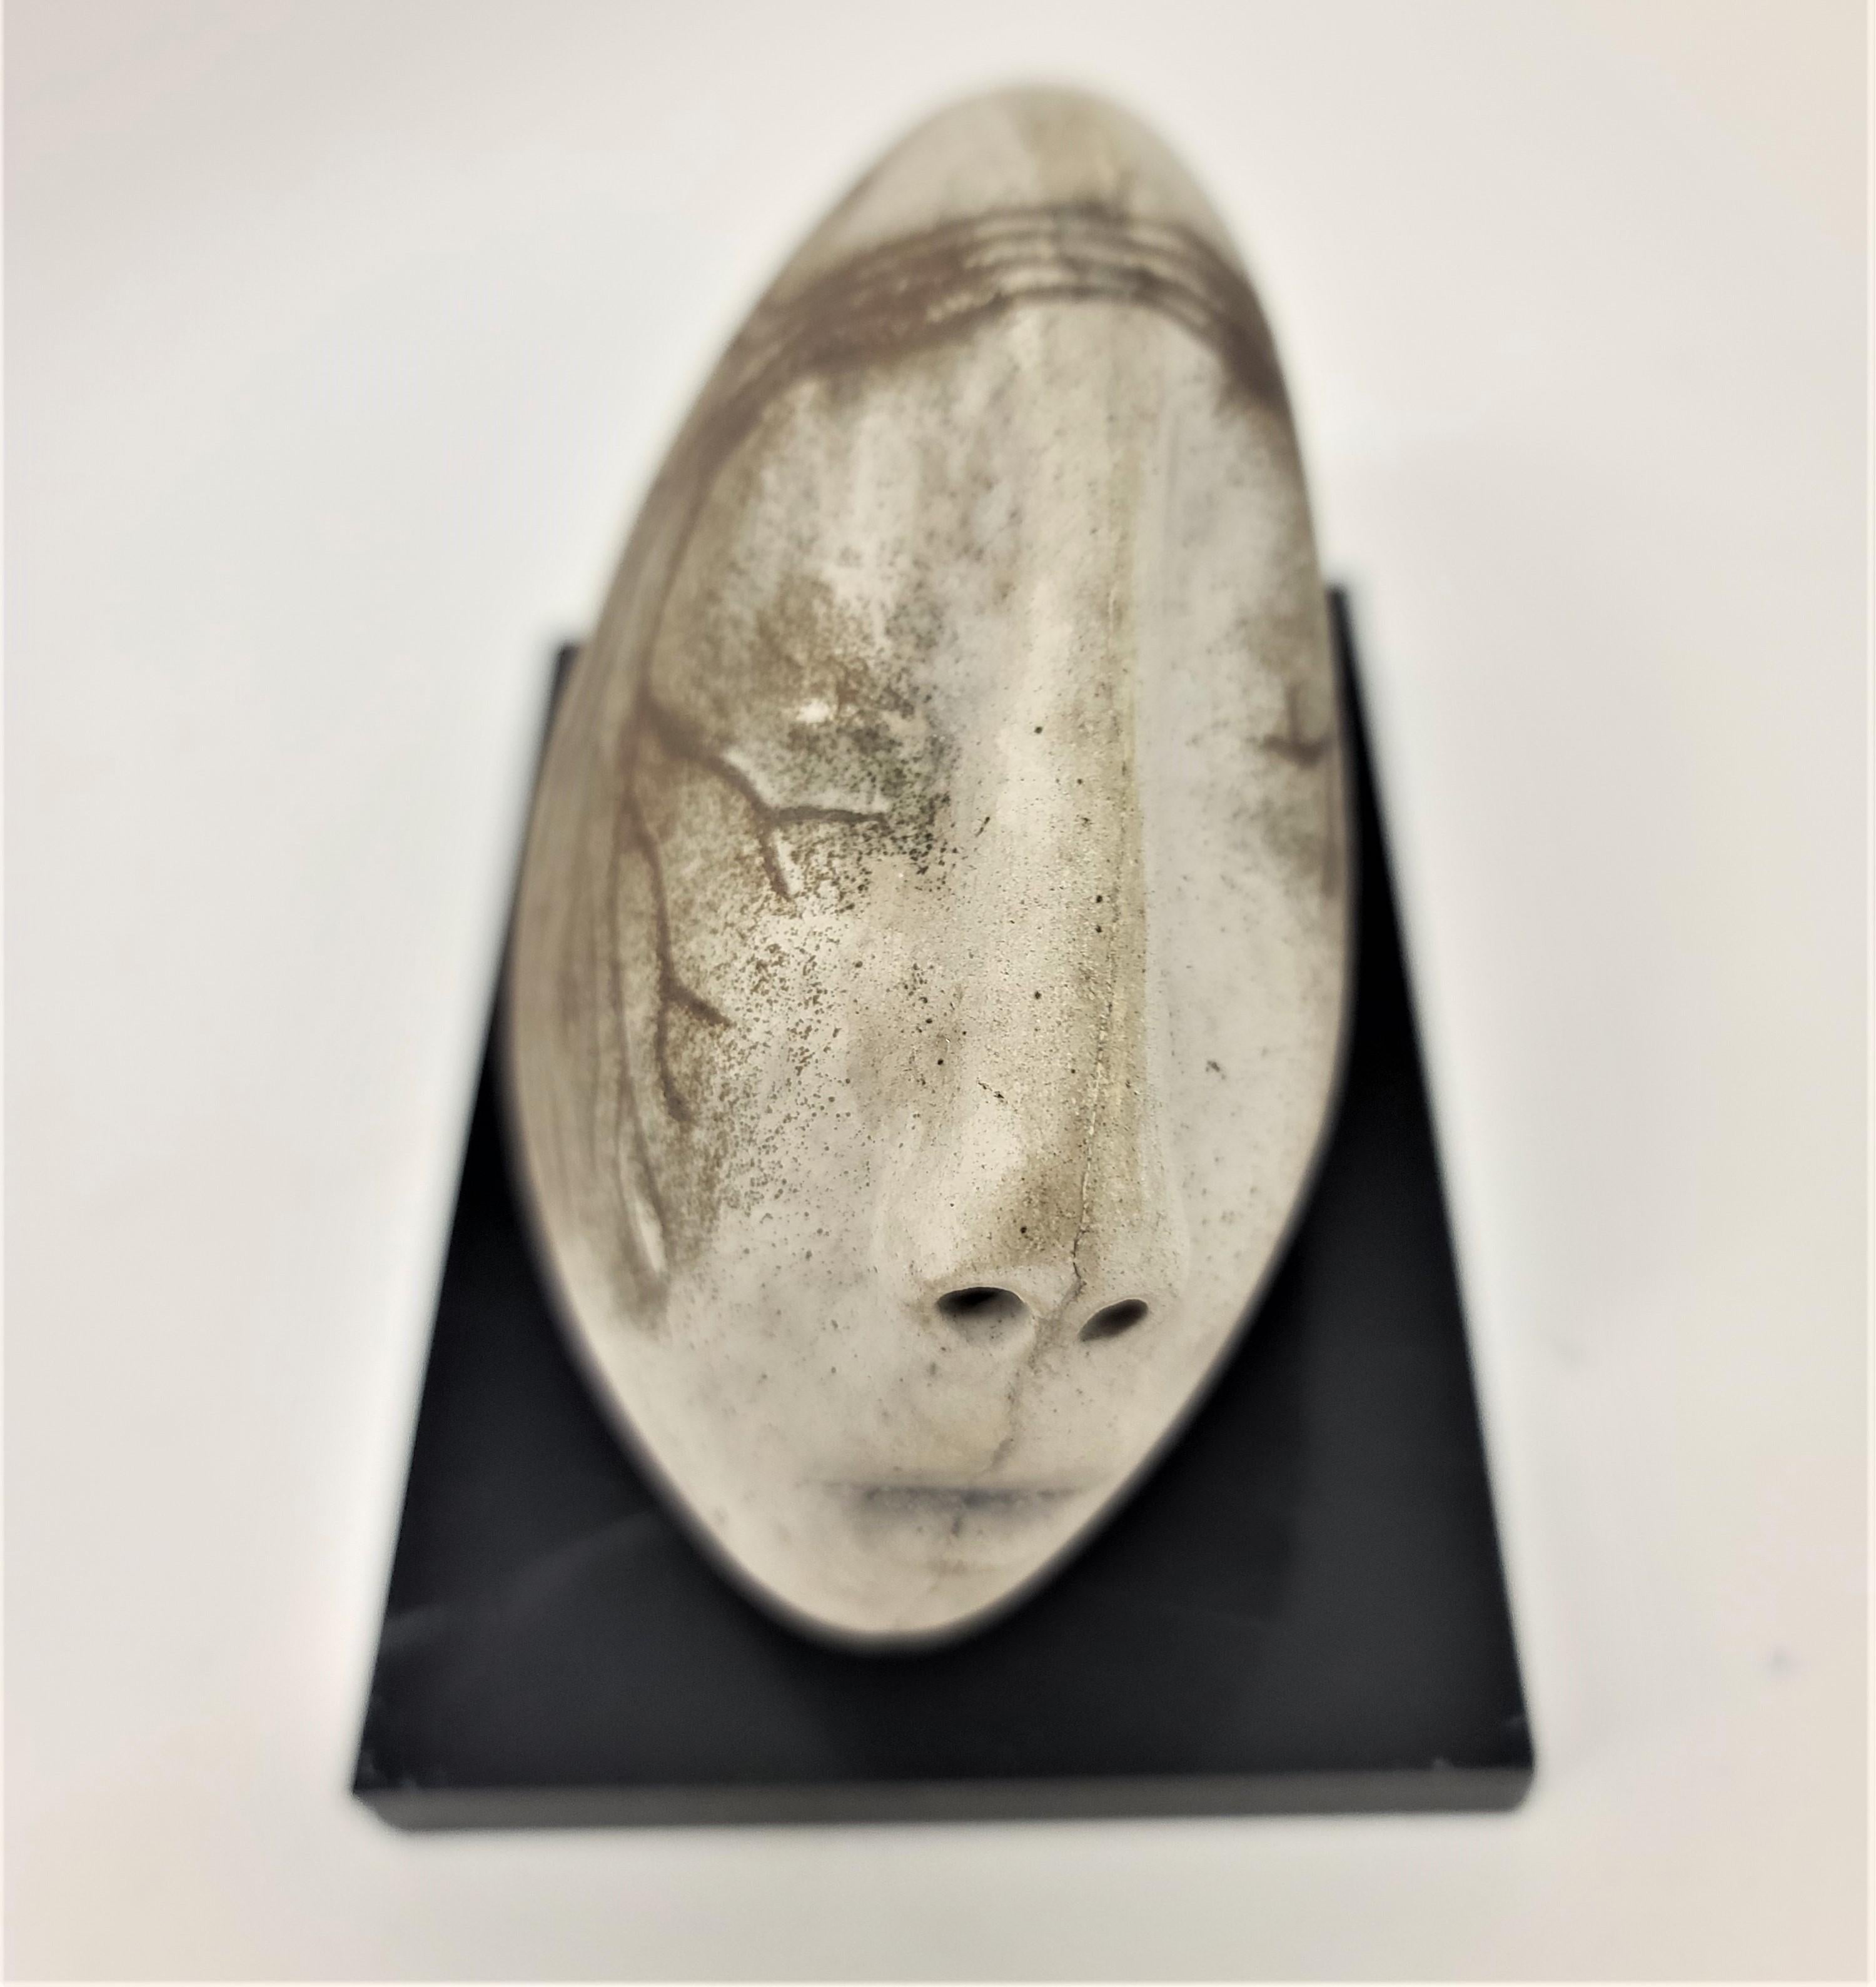 A sculpture of an abstracted head in ceramic, mounted on a black acrylic base, by an unknown artist. The human head and features have been intentionally warped into an organic stone shape, decorated with details of roots. Markings include '2'